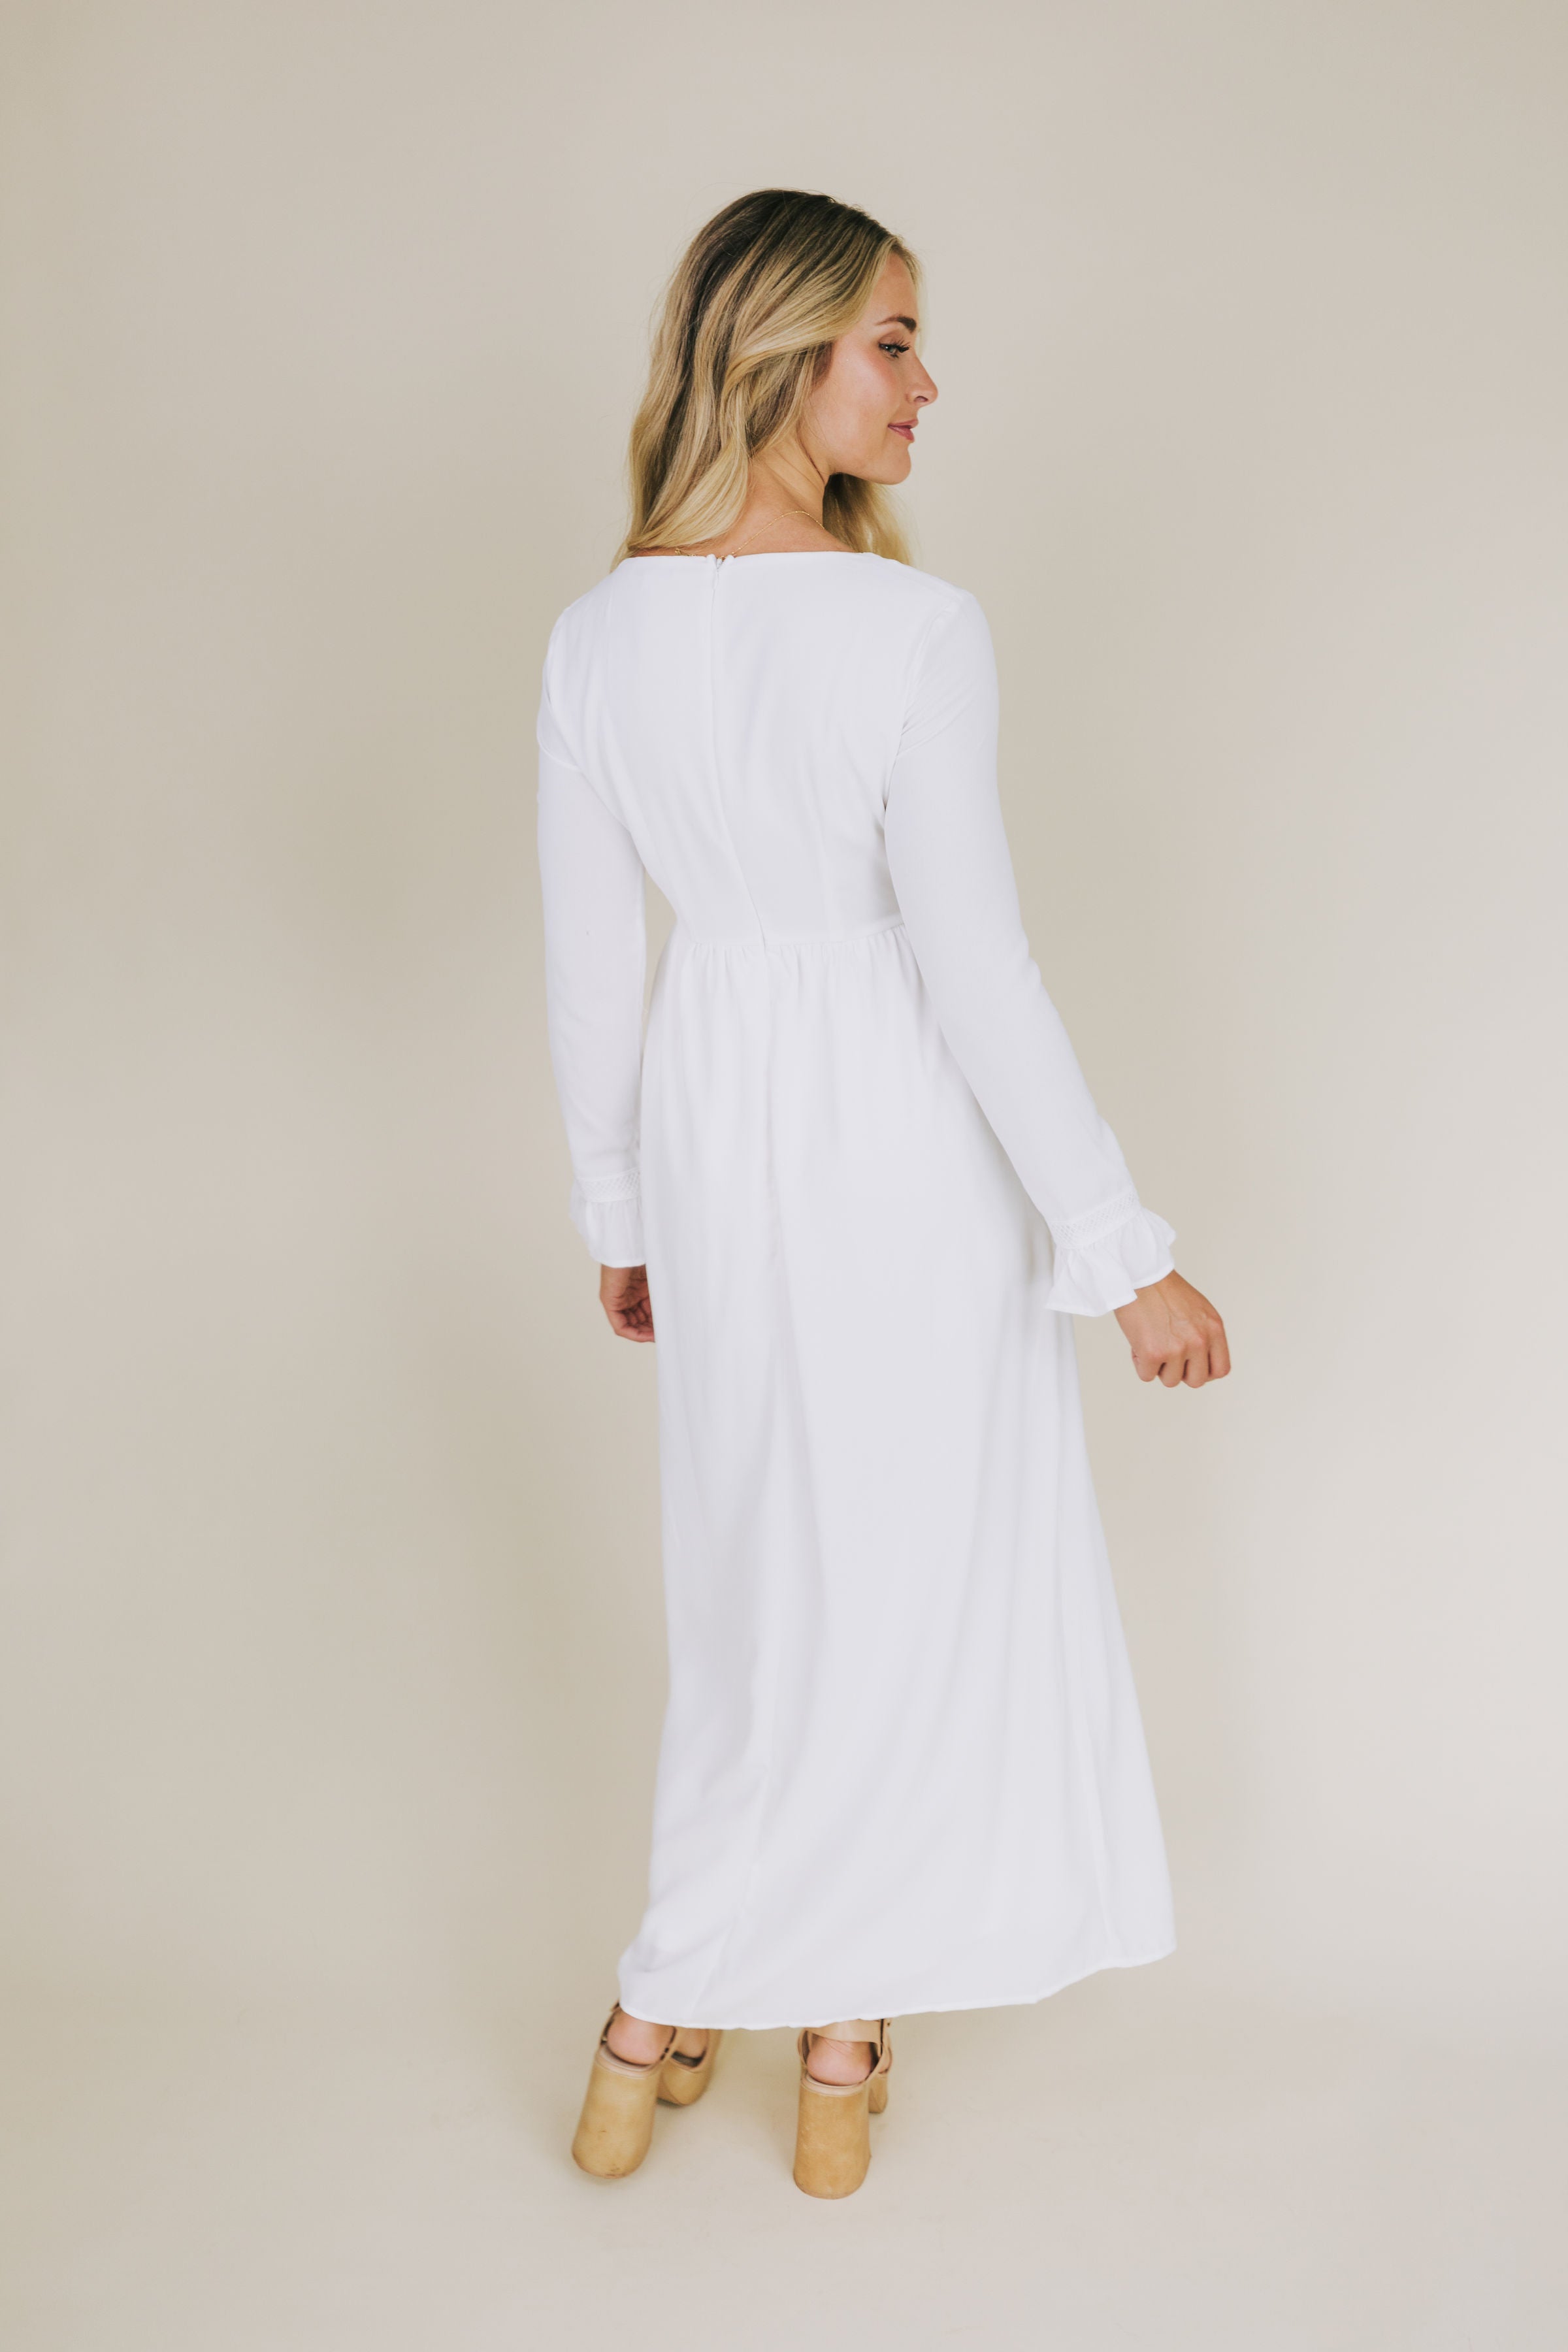 EXCLUSIVE - The White: Norma